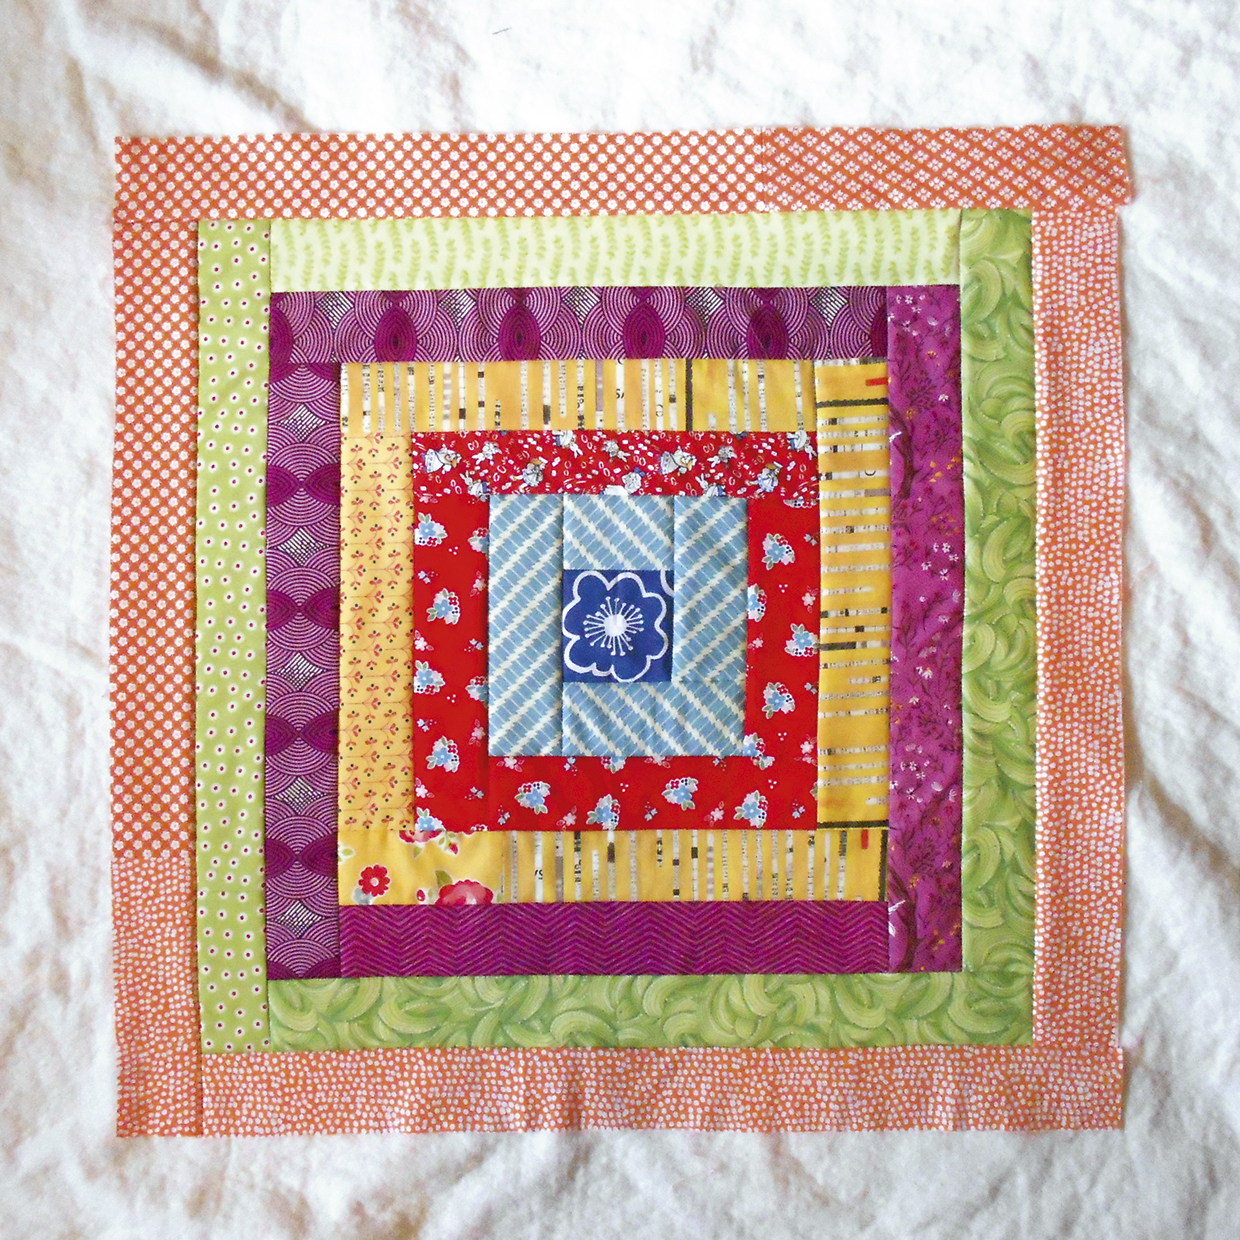 How to make a Jelly Roll Quilt step 8